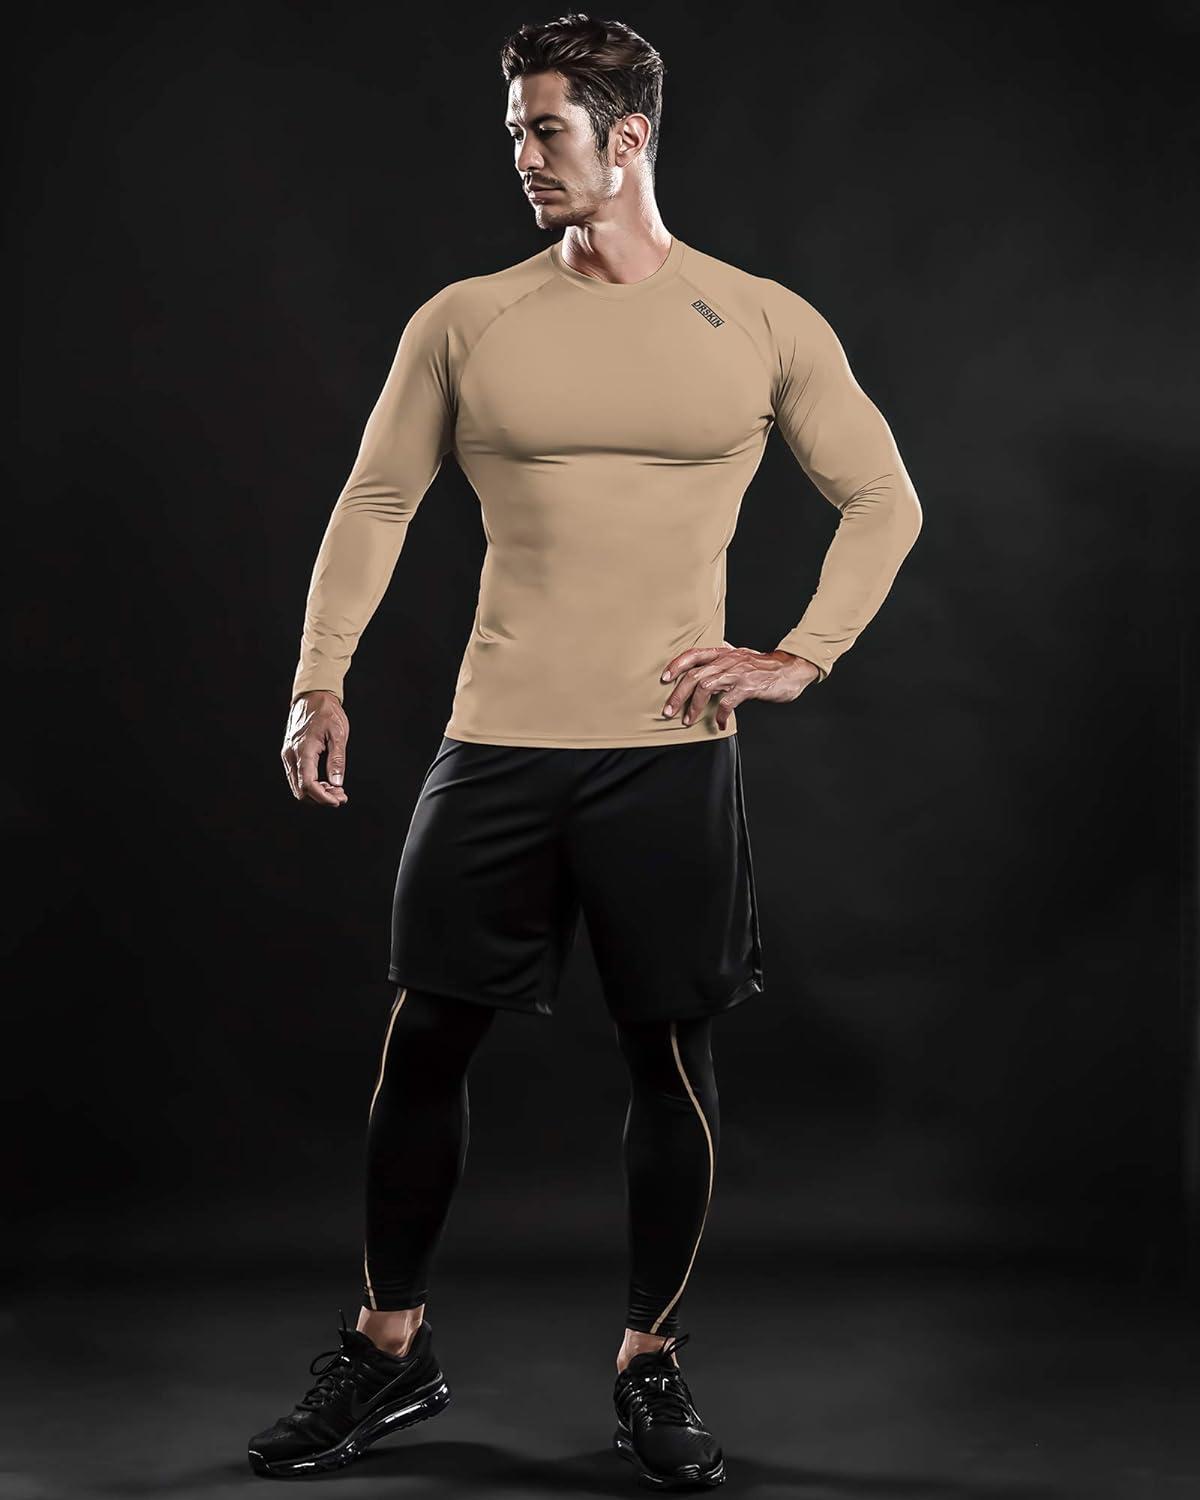 DRSKIN dr skin Men's Compression Tights Sports Long Sleeve Top Gym Running  Fitness Quick Dry Football Soccer, Men's Fashion, Activewear on Carousell